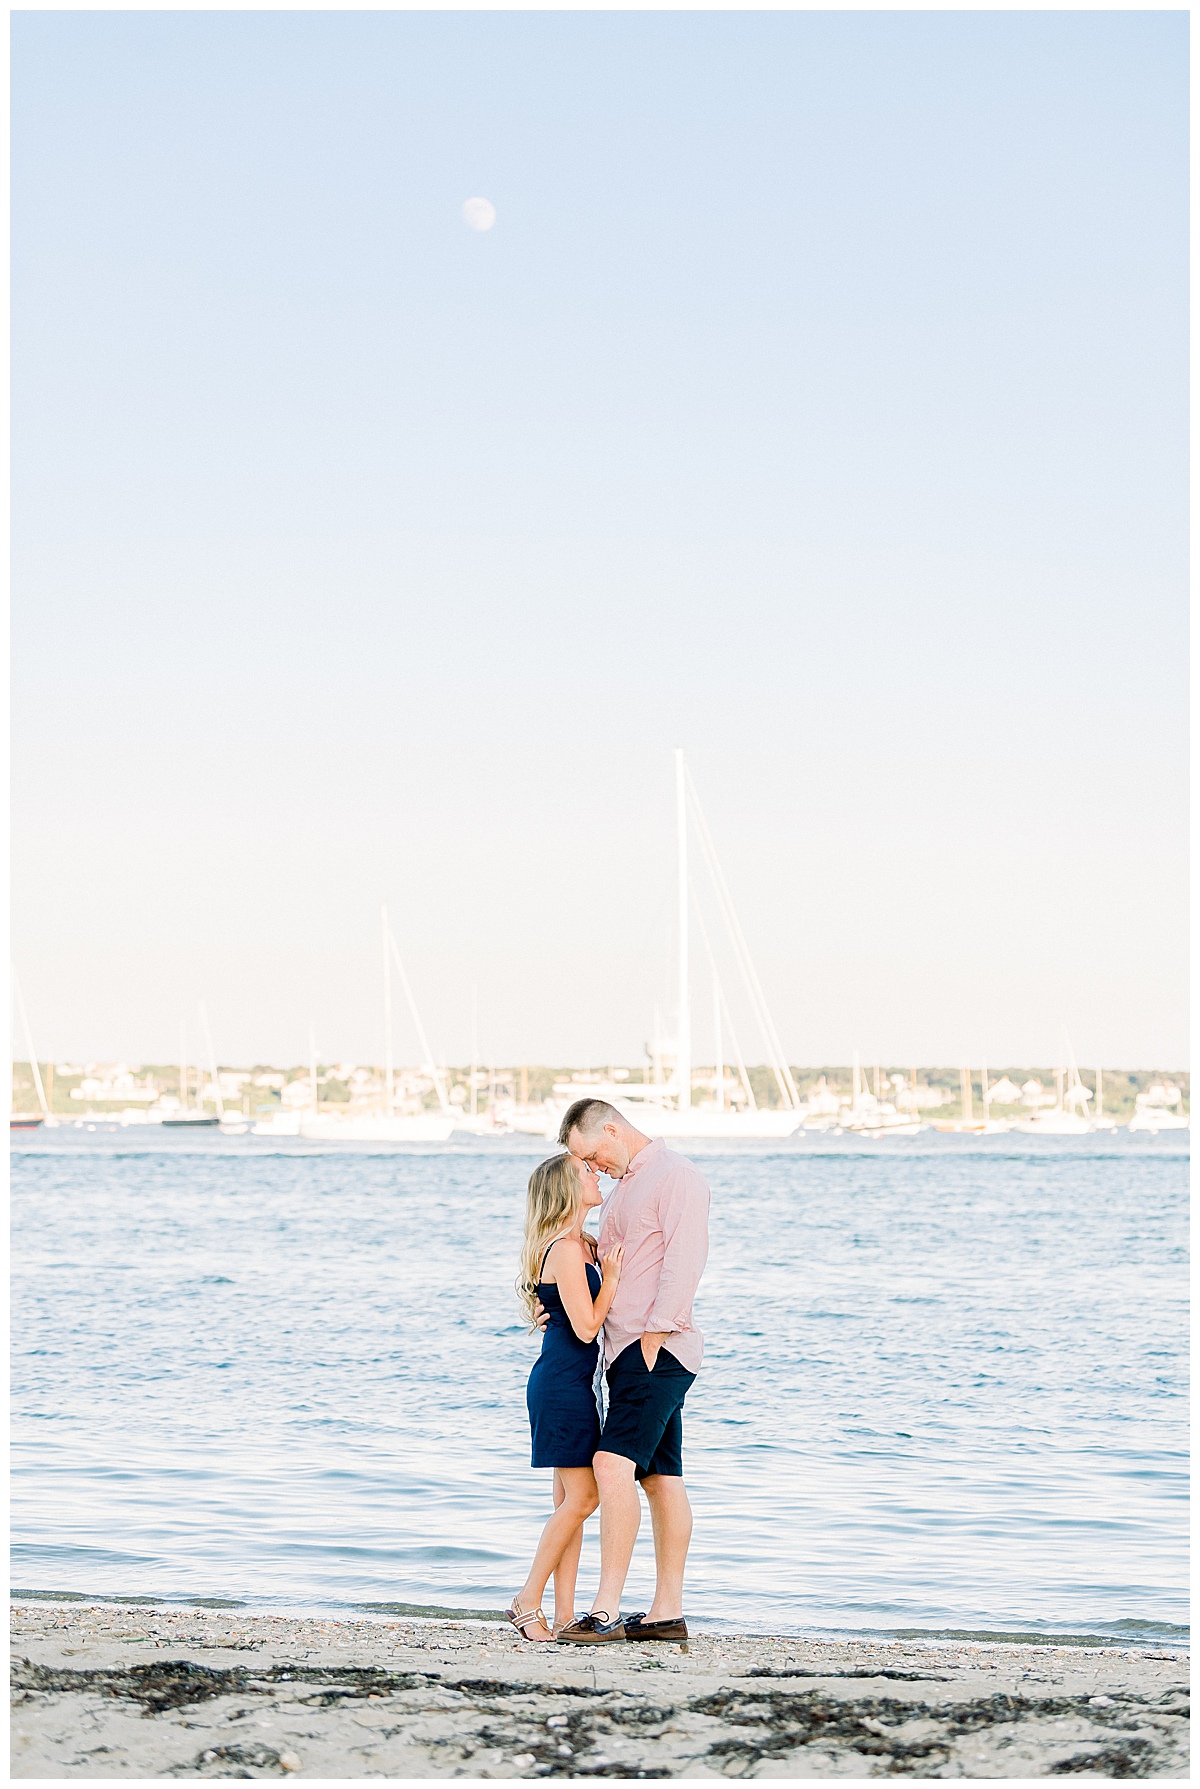 Kylee and Taylor's Nantucket Engagement at Brant Point Lighthouse